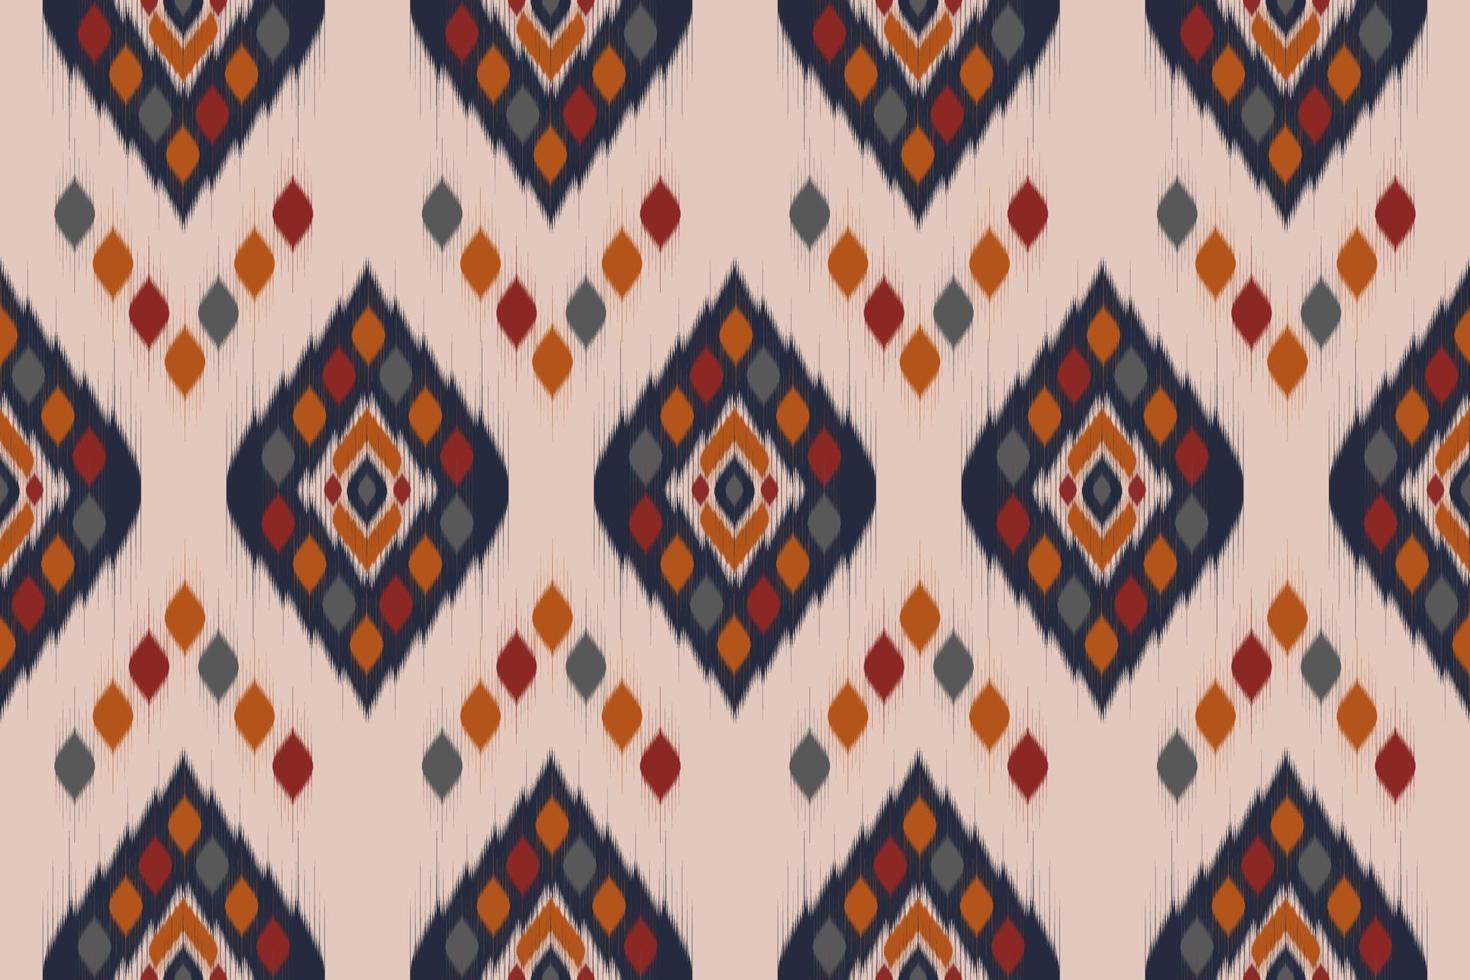 Ethnic Ikat seamless pattern in tribal. Design for background, wallpaper, vector illustration, fabric, clothing, batik, carpet, embroidery.